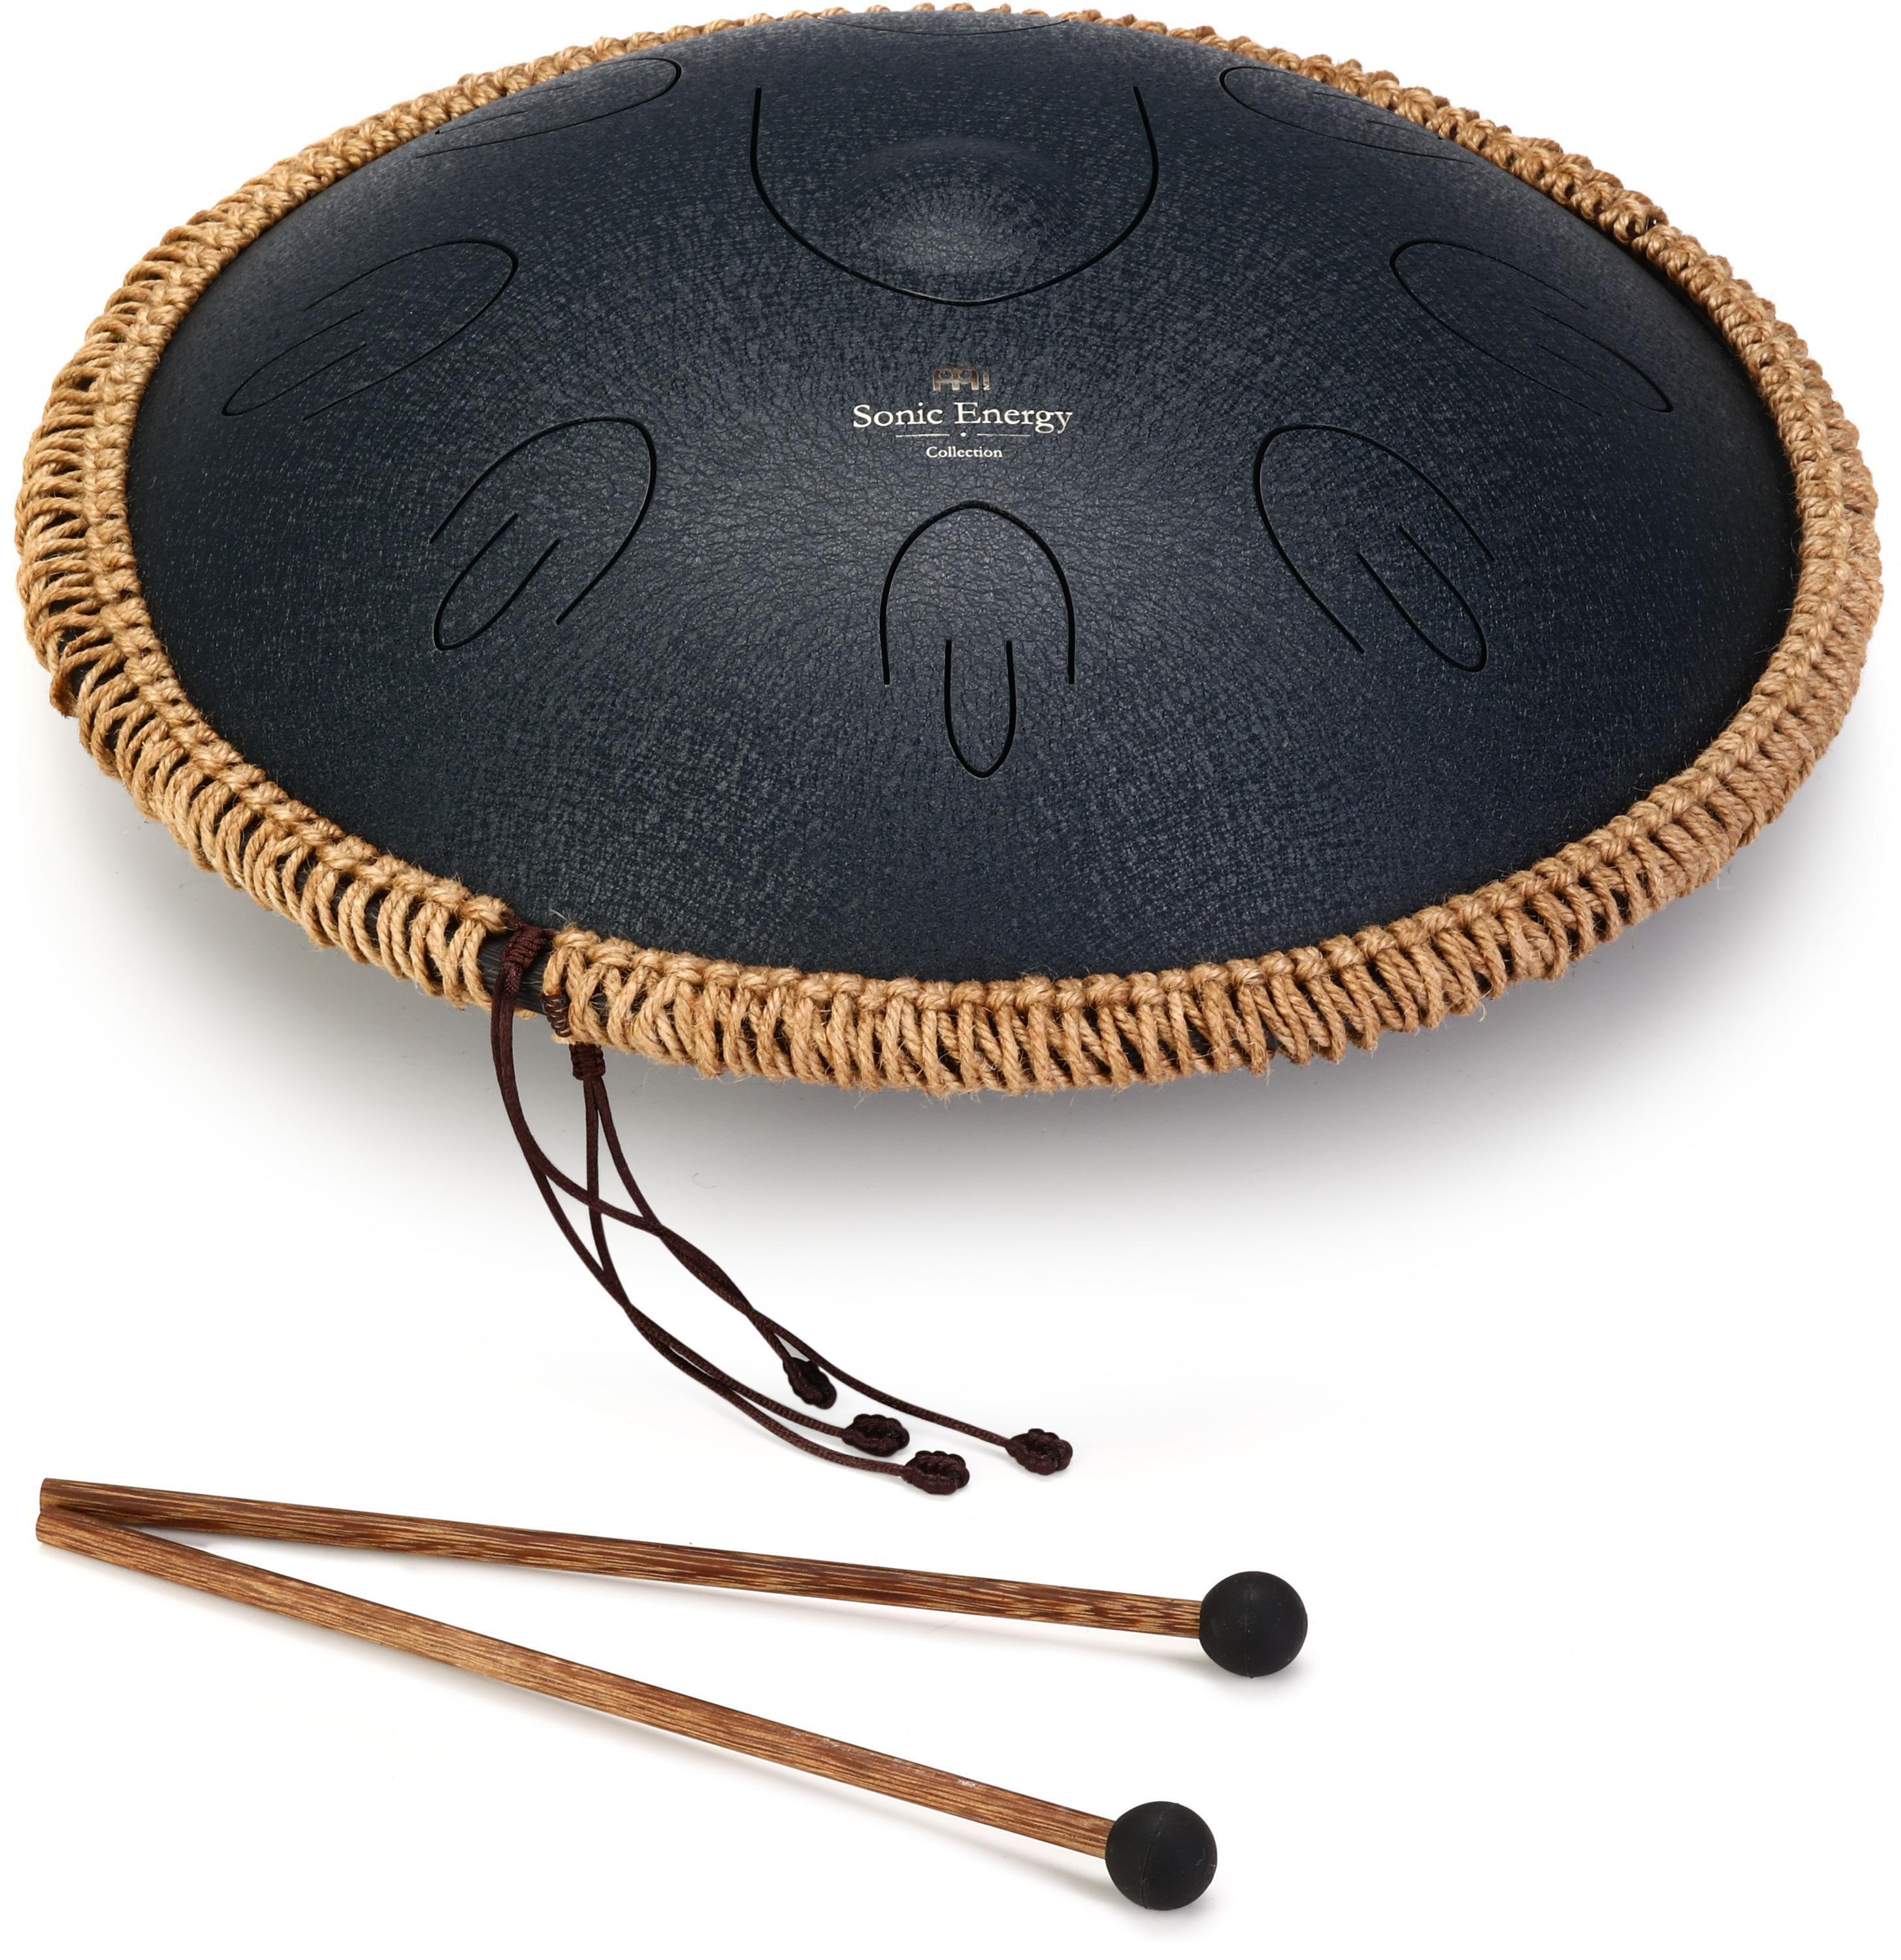 Octave Steel Tongue Drum by Meinl Sonic Energy - Didge Project